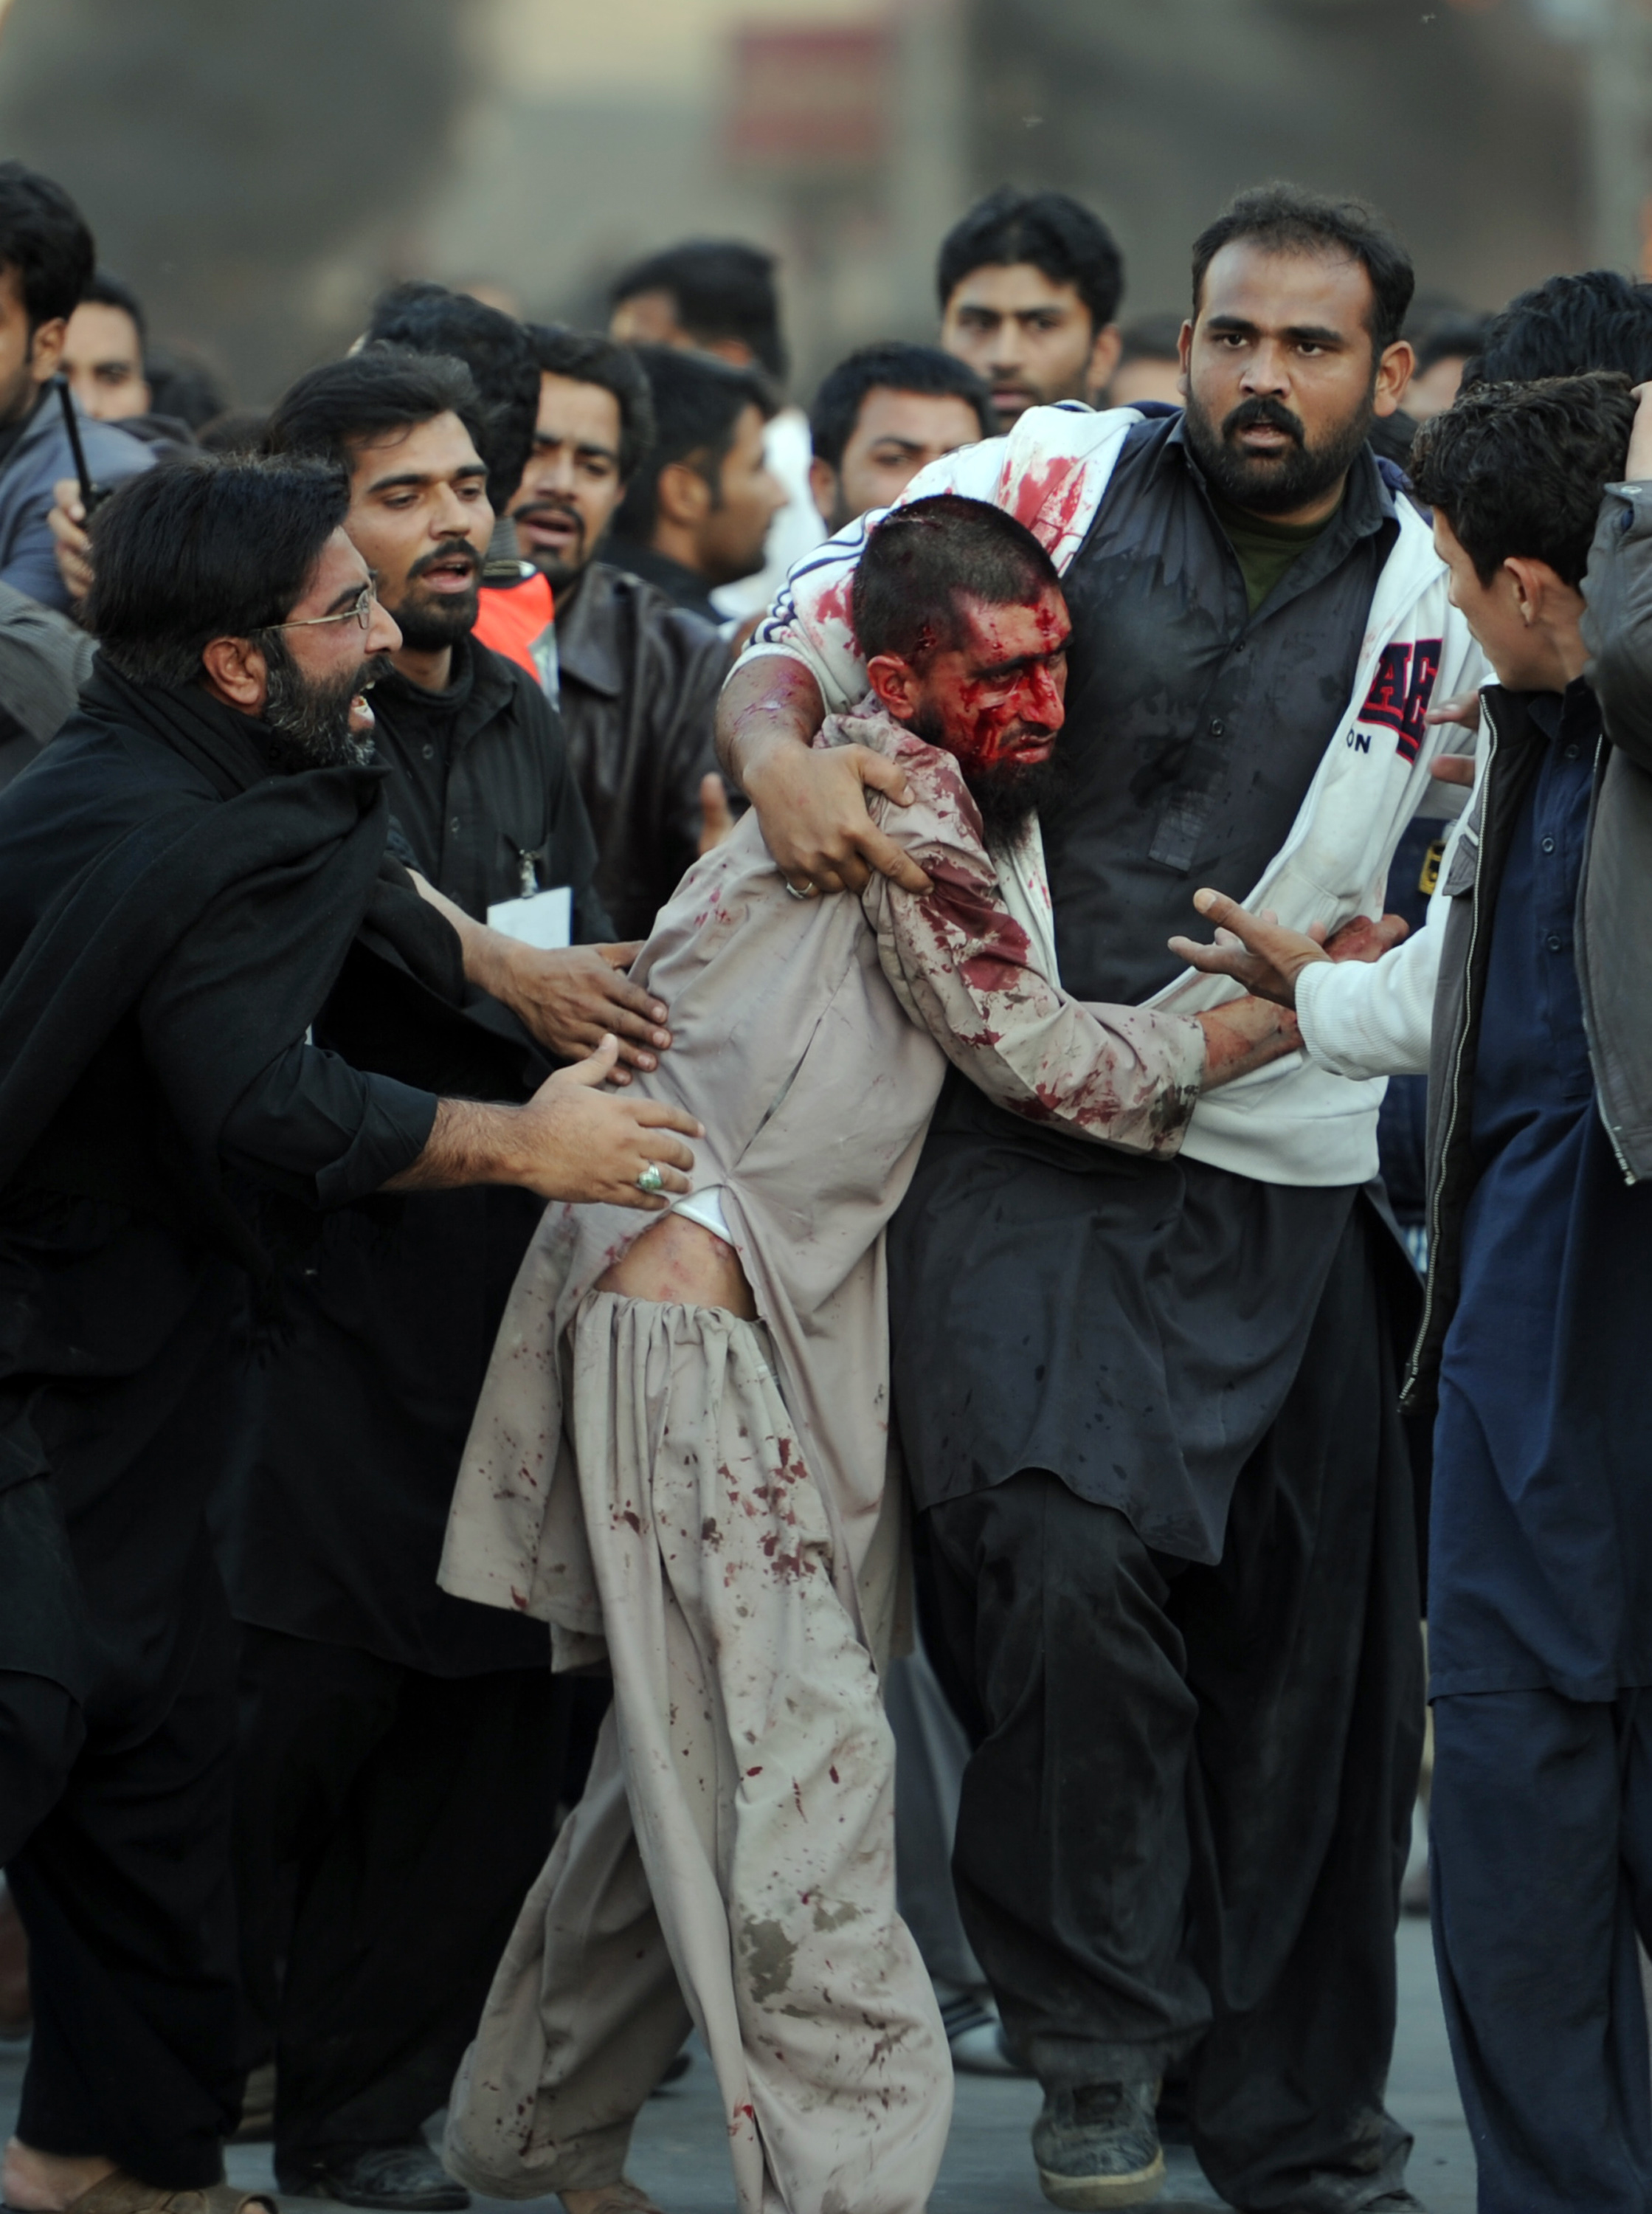 Pakistani Shiite Muslims assist an injured Sunni Muslim following clashes during an Ashura procession in Rawalpindi on November 15, 2013. Sectarian clashes in Pakistan's garrison city Rawalpindi left two people dead and over 20 injured as worshippers massed to mourn the seventh century martyrdom of Hussain, the grandson of prophet Mohammad. The clashes erupted in Rawalpindi when a procession by Shiite Muslims was underway in the main downtown area and a prayer sermon in a nearby Sunni Muslim mosque started at the same time. AFP PHOTO/Aamir QURESHI